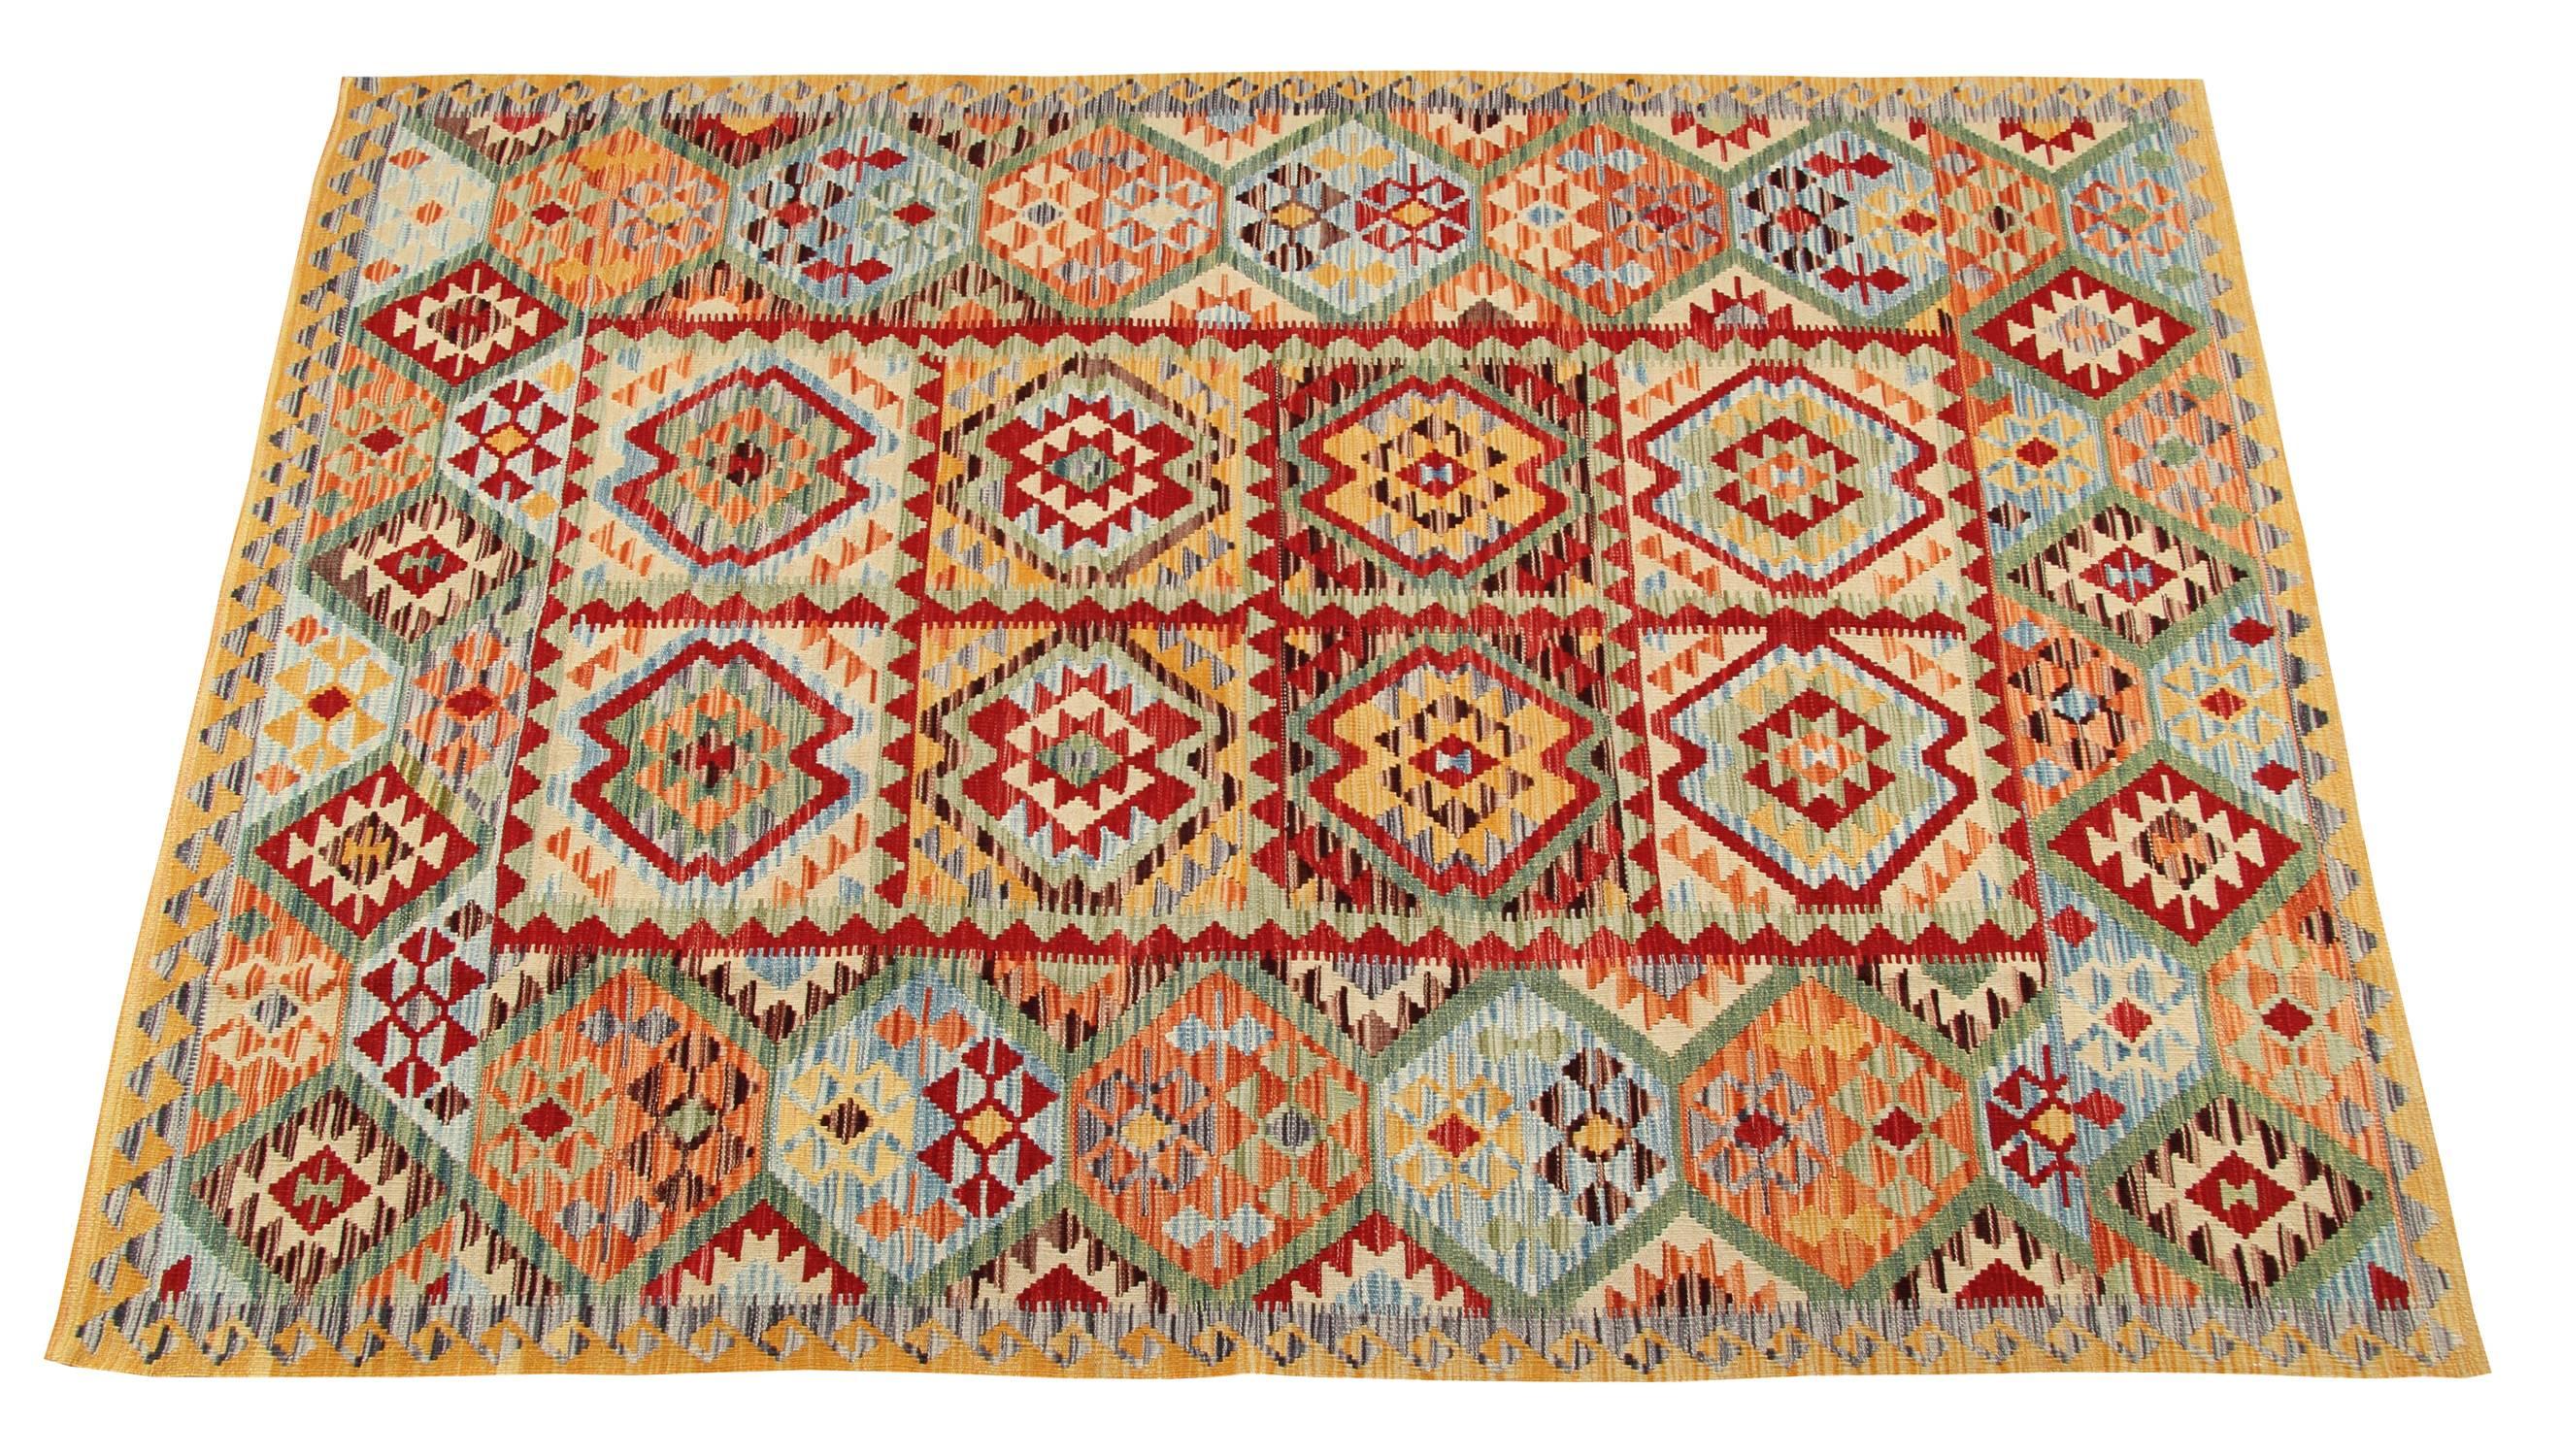 This Kilim rug has a varied use of colours; the aquamarine background is broken up by multi-colour designs and lines. The overall colours are soft and appealing: light blue, cream and light yellow, yet strong red accents interrupt the serene